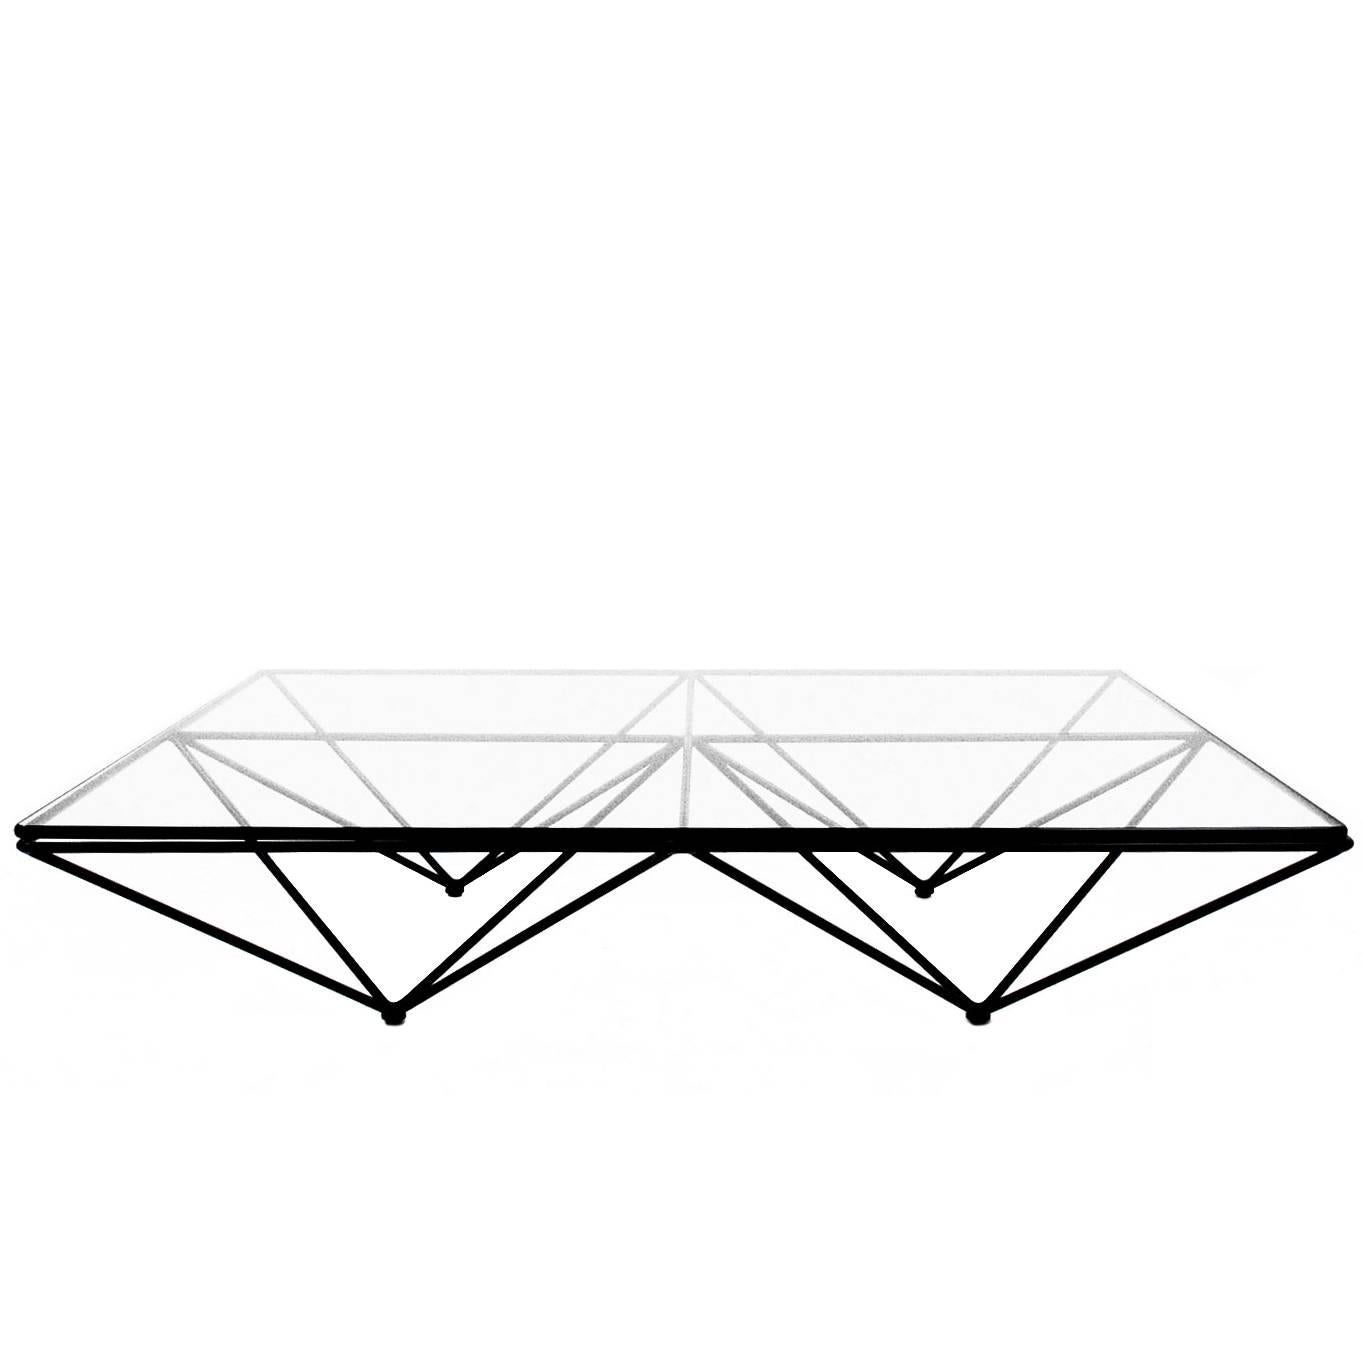 Center Table Designed by Paolo Piva